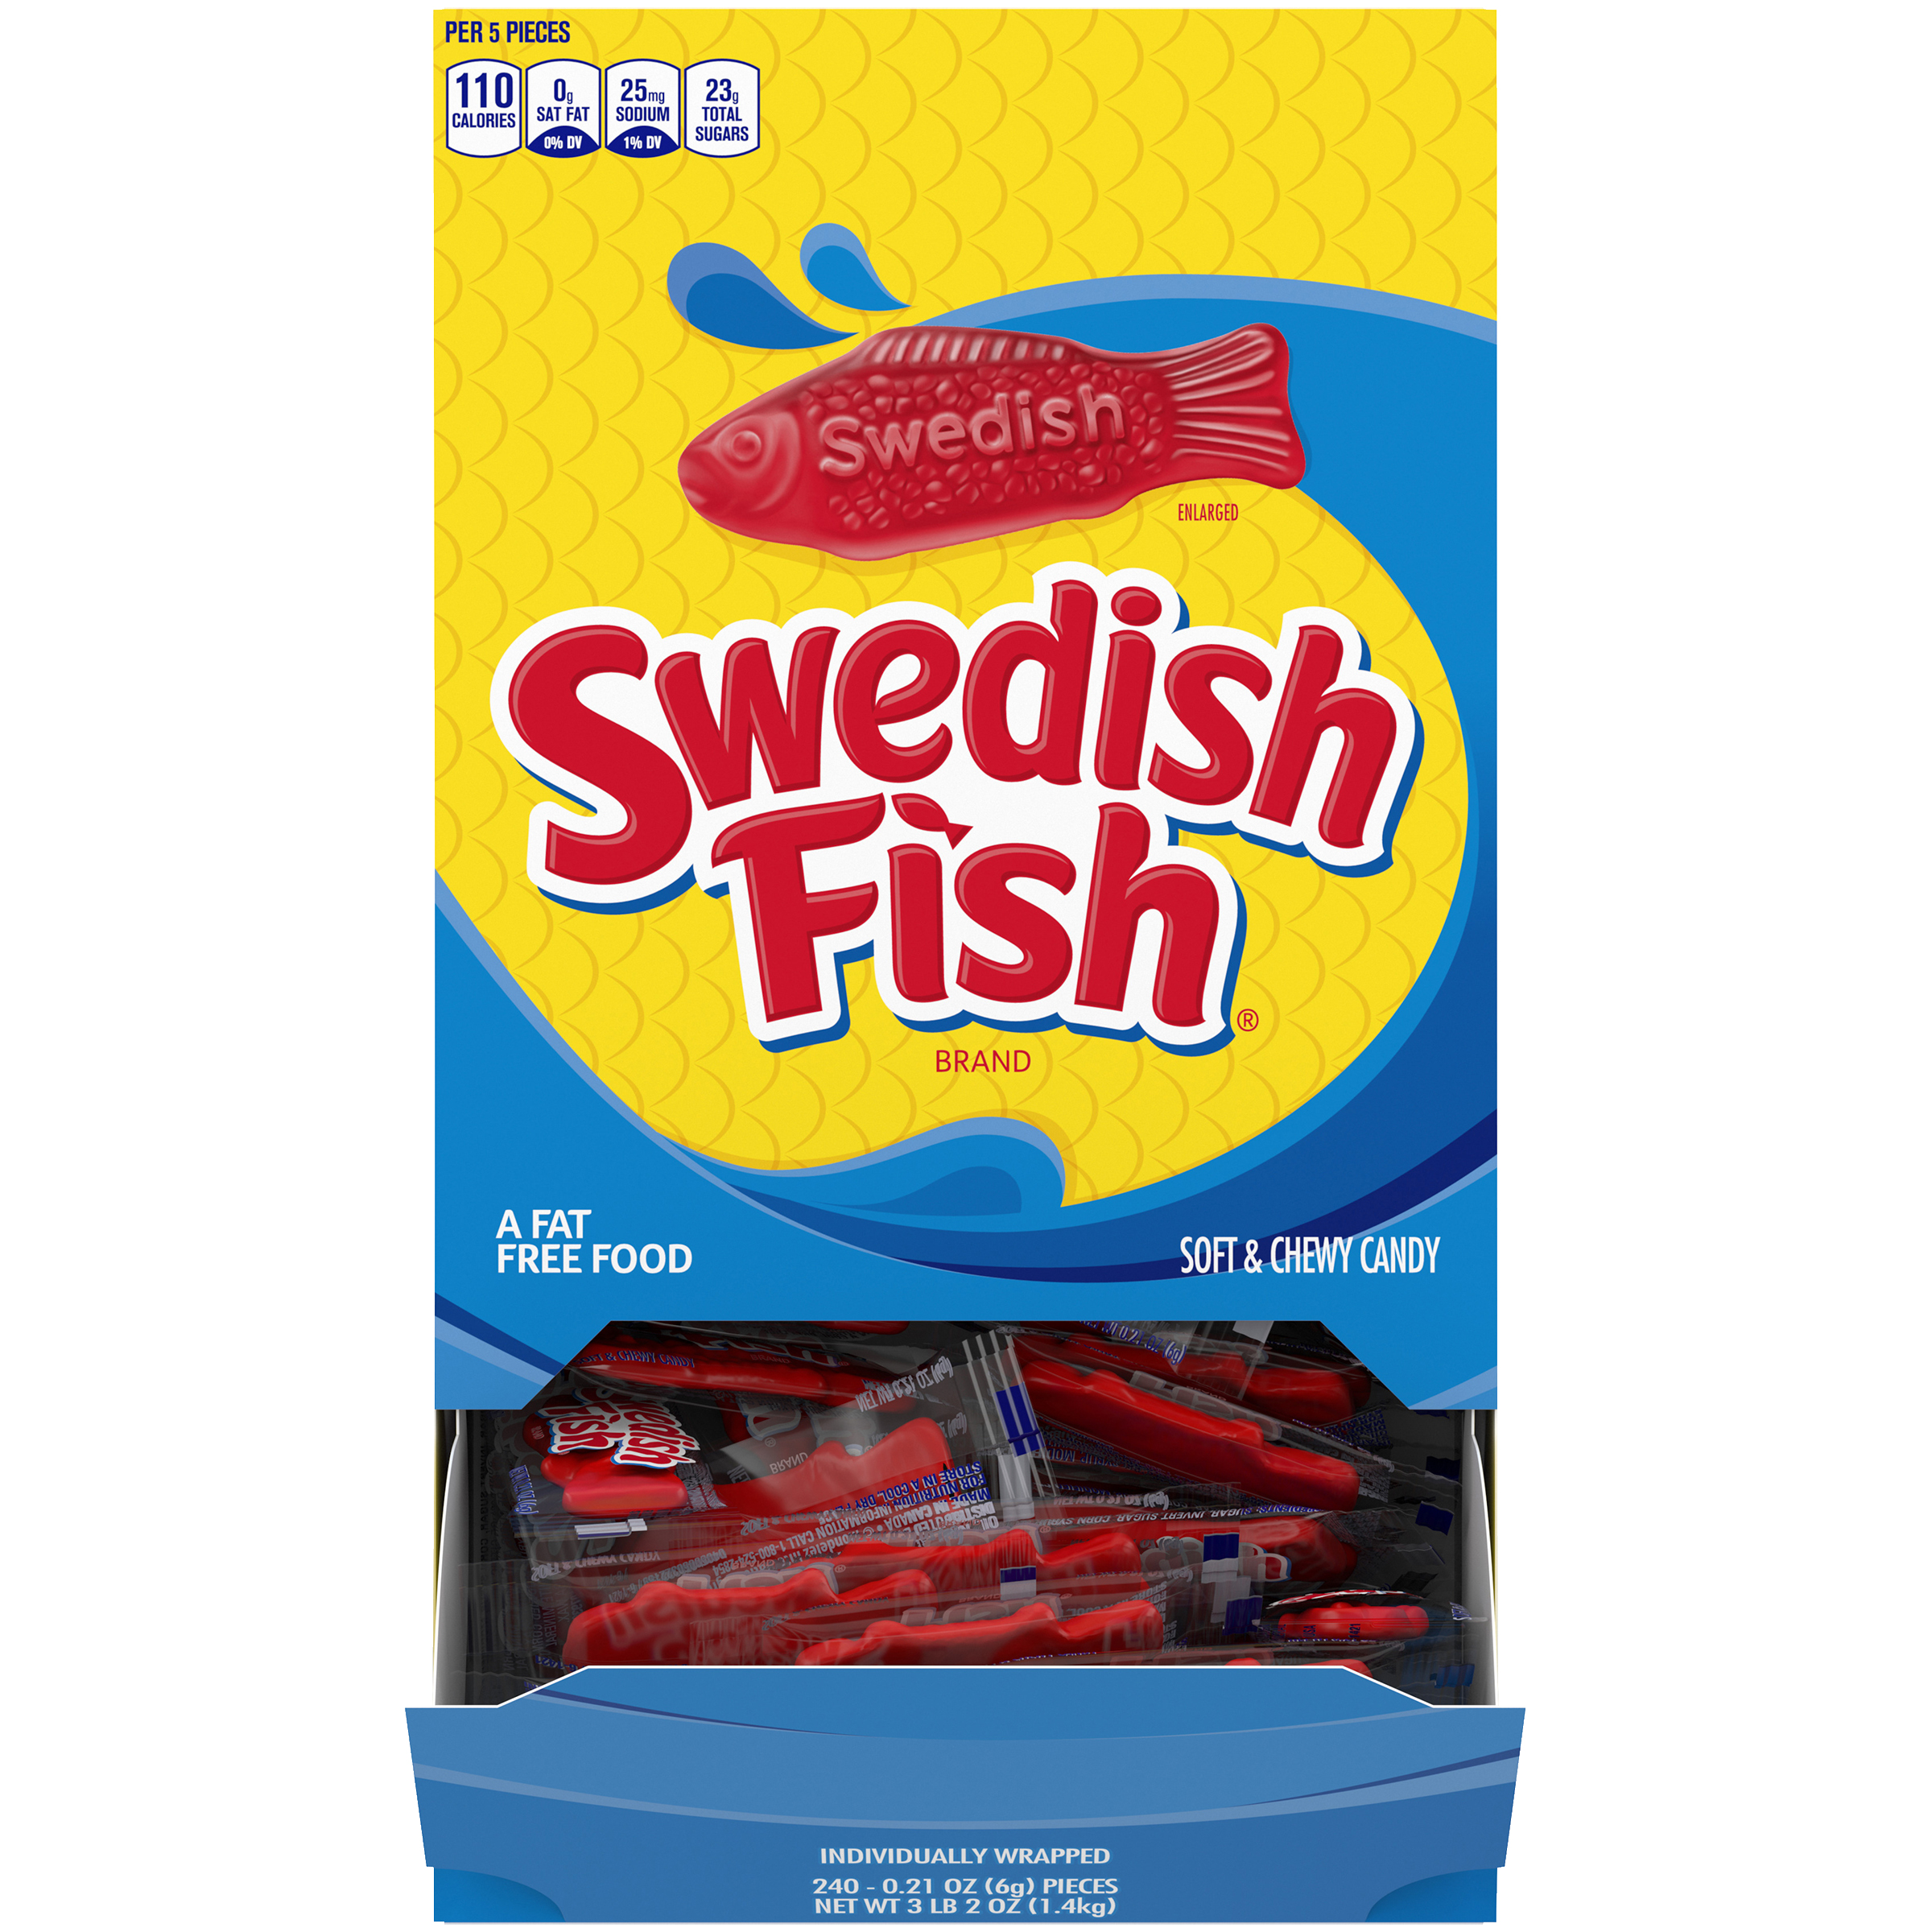 SWEDISH FISH Individually Wrapped Soft & Chewy Candy, 240 Count Box-1